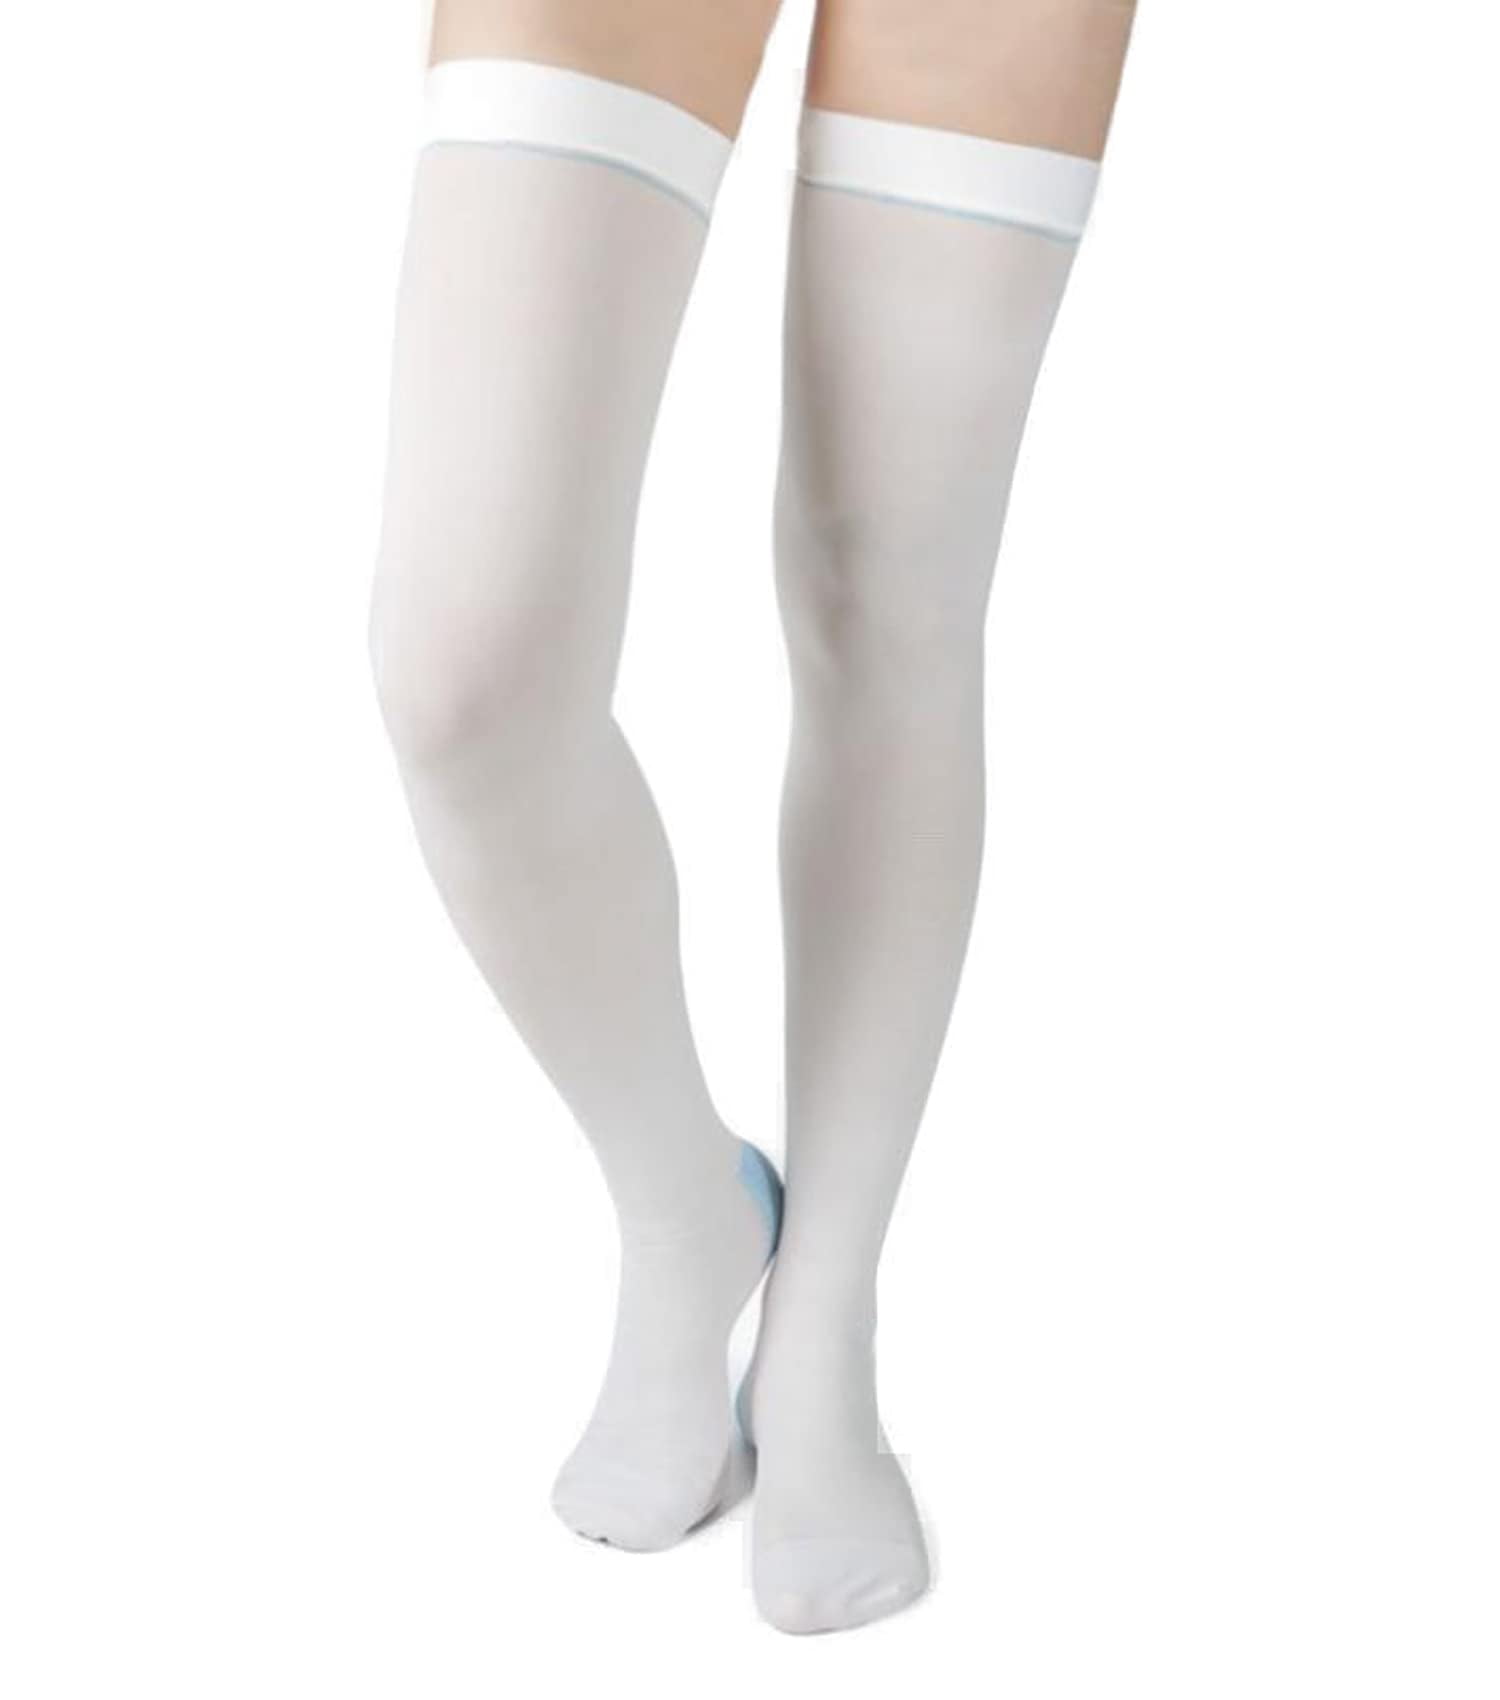 Covidien TED Black Knee Length Anti-Embolism Stockings for Continuing Care  - Compression Stockings